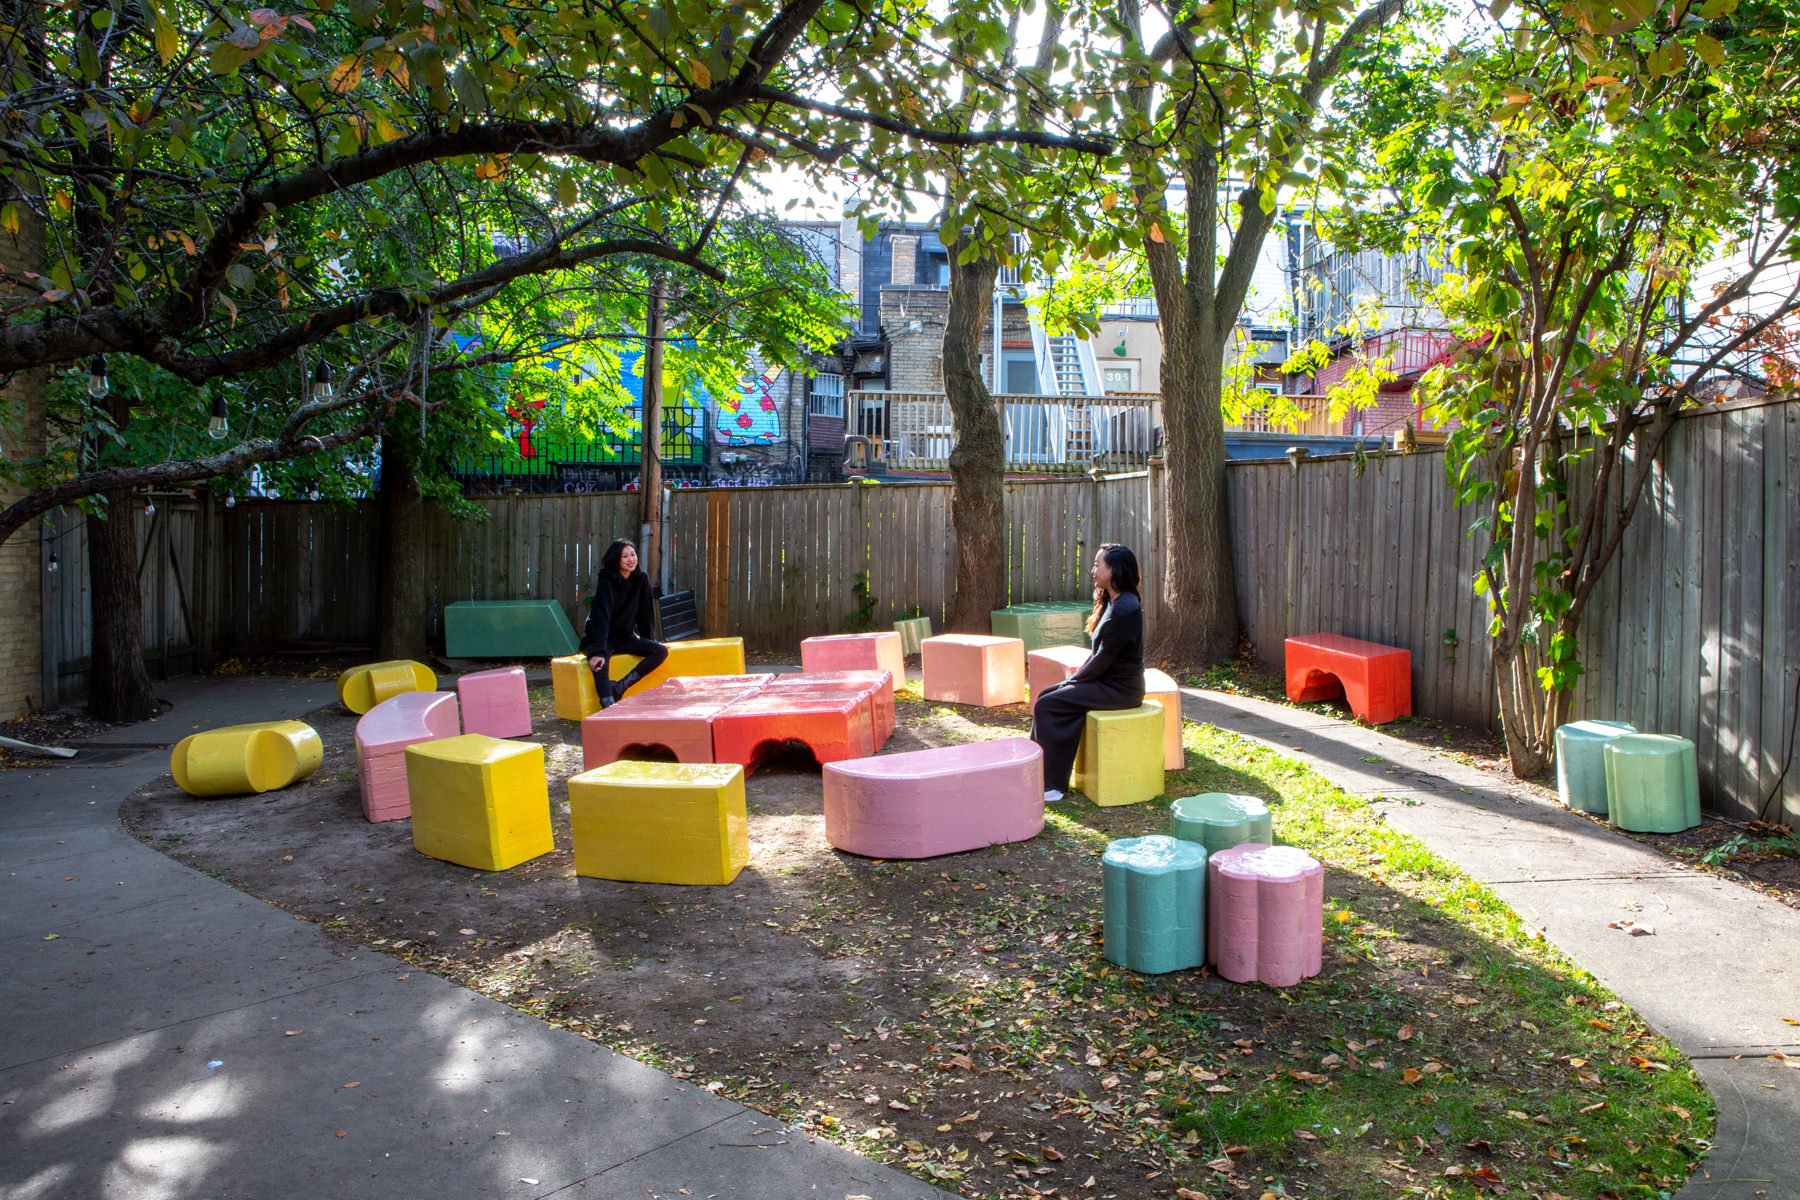 Wide-angle view of about 20 large-scale, colourful blocks from Cecil Community Planting Imagination project. Two people dressed in black sit on 2 different blocks.